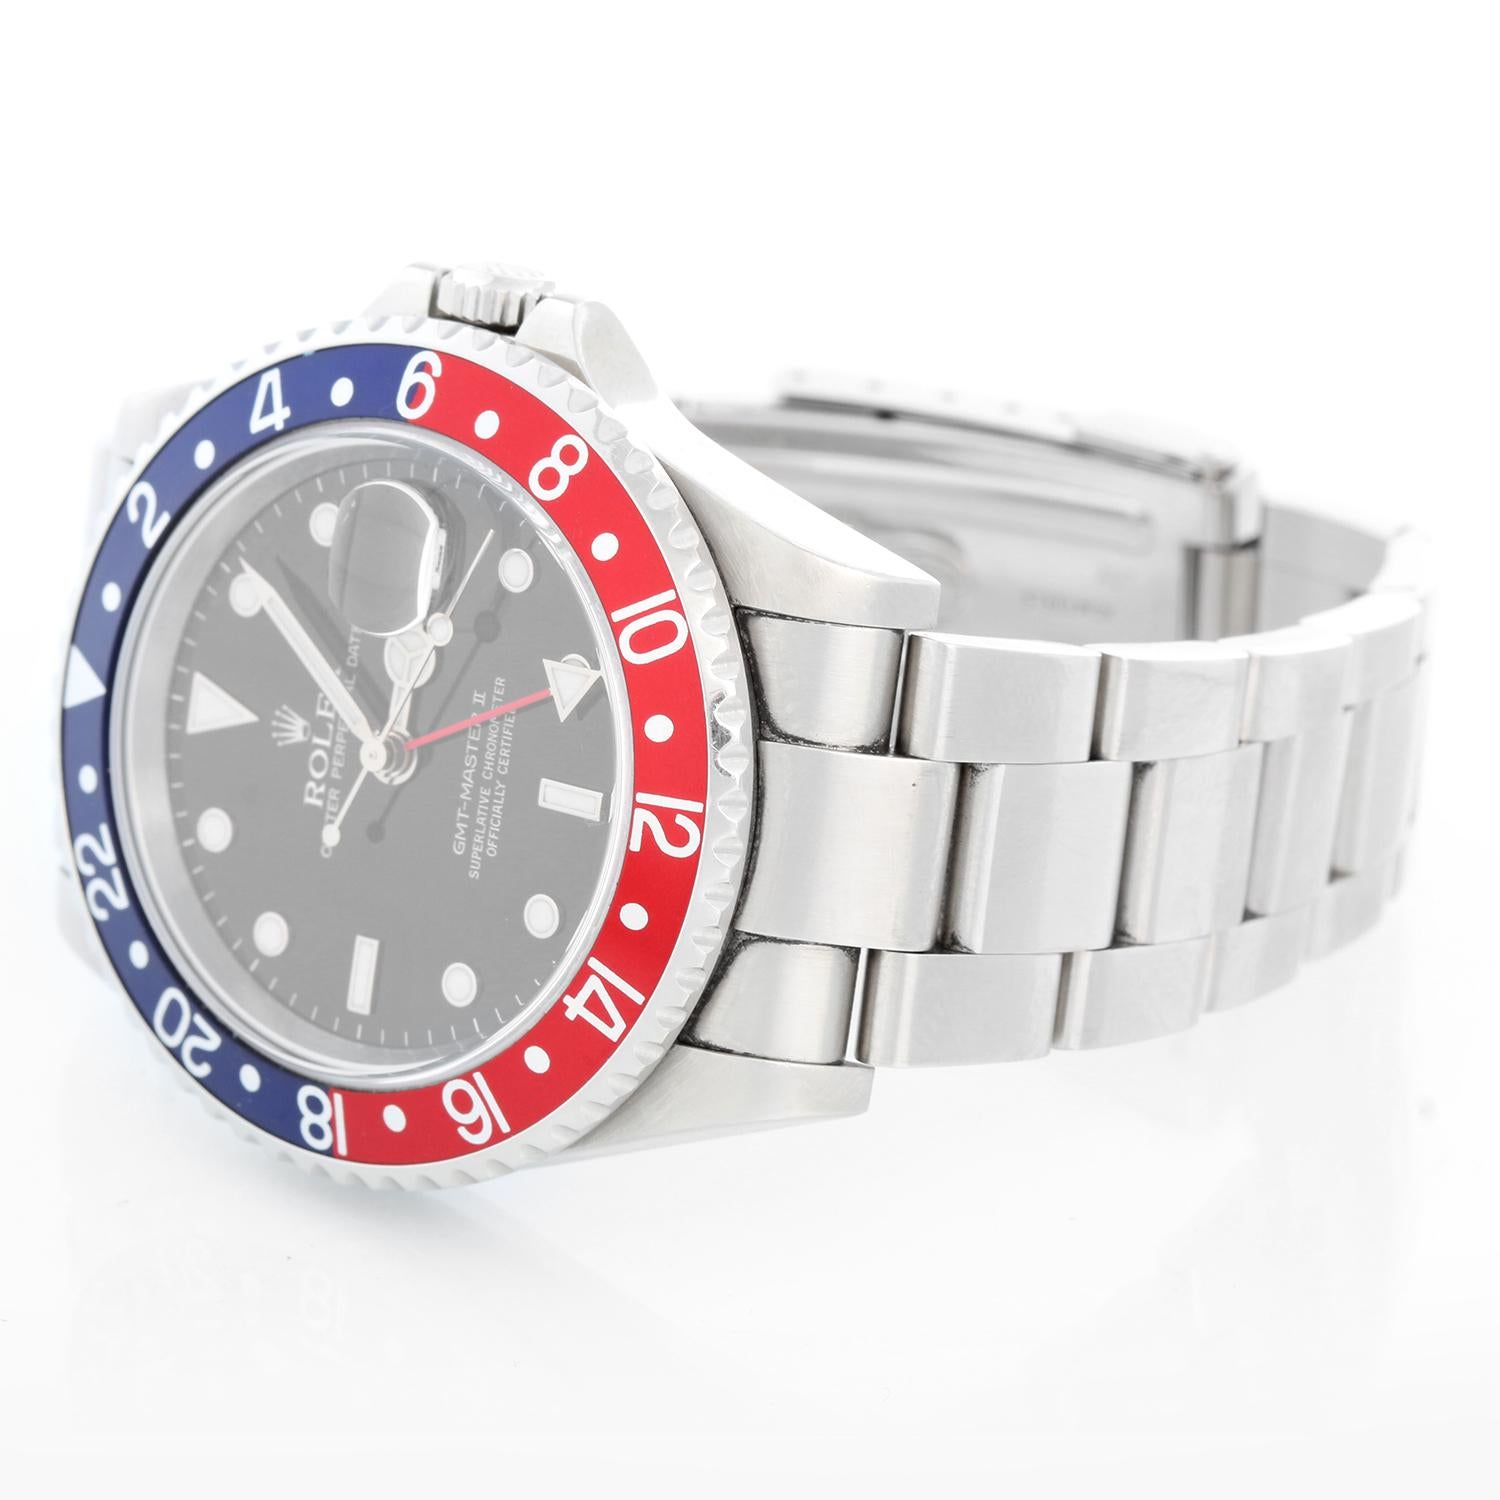 Rolex GMT-Master II Stainless Steel Men's Watch 16710 Blue/red Bezel - Automatic winding, 31 jewels, Quickset, sapphire crystal. Stainless steel case; rotating bezel with blue/red bezel (40mm diameter). Black dial with luminous style markers. Rolex